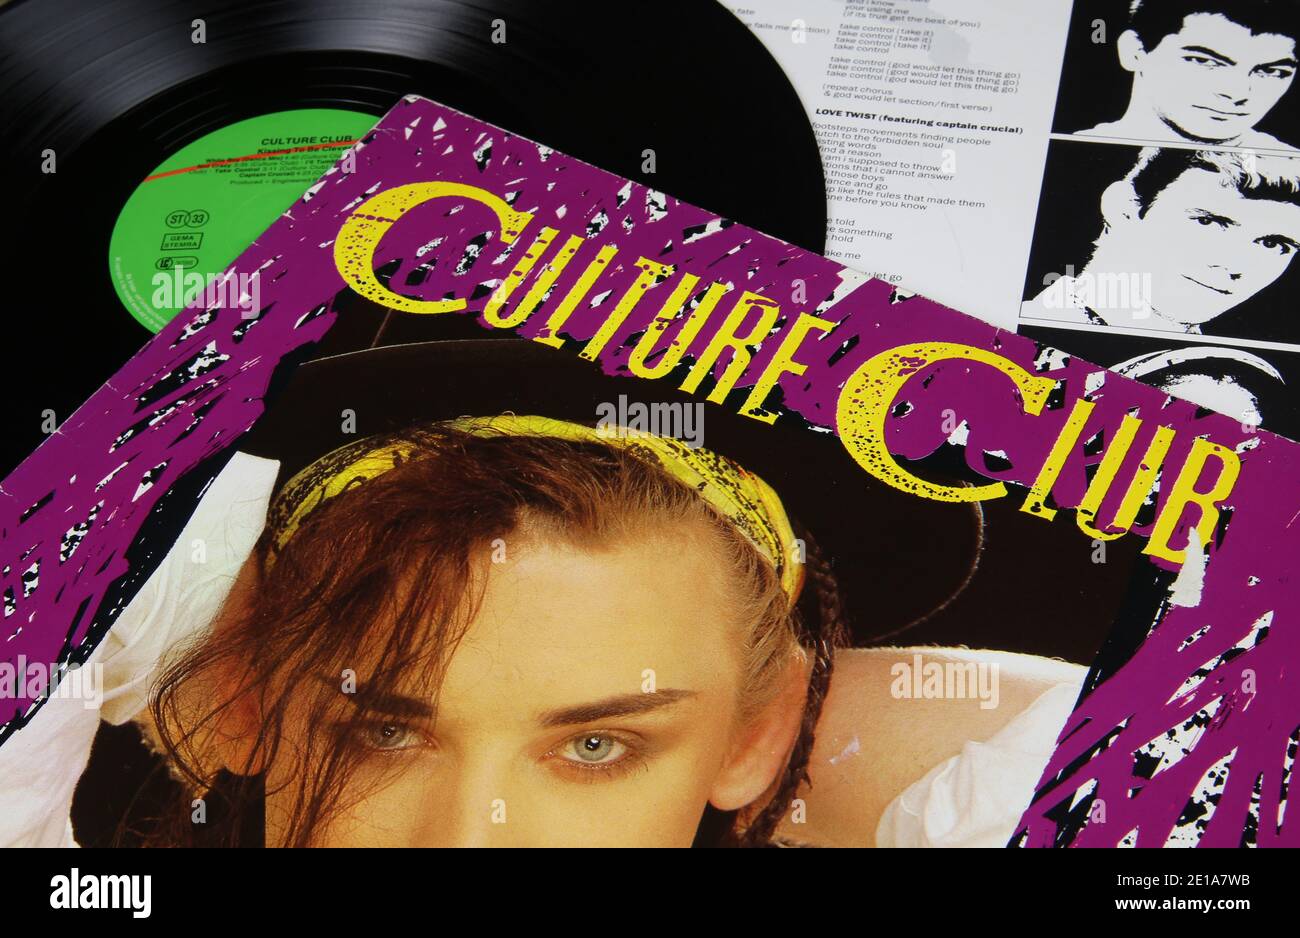 Viersen, Germany - May 9. 2020: Closeup of vinyl record covers from british  pop music band Culture Club (focus on band name in center Stock Photo -  Alamy